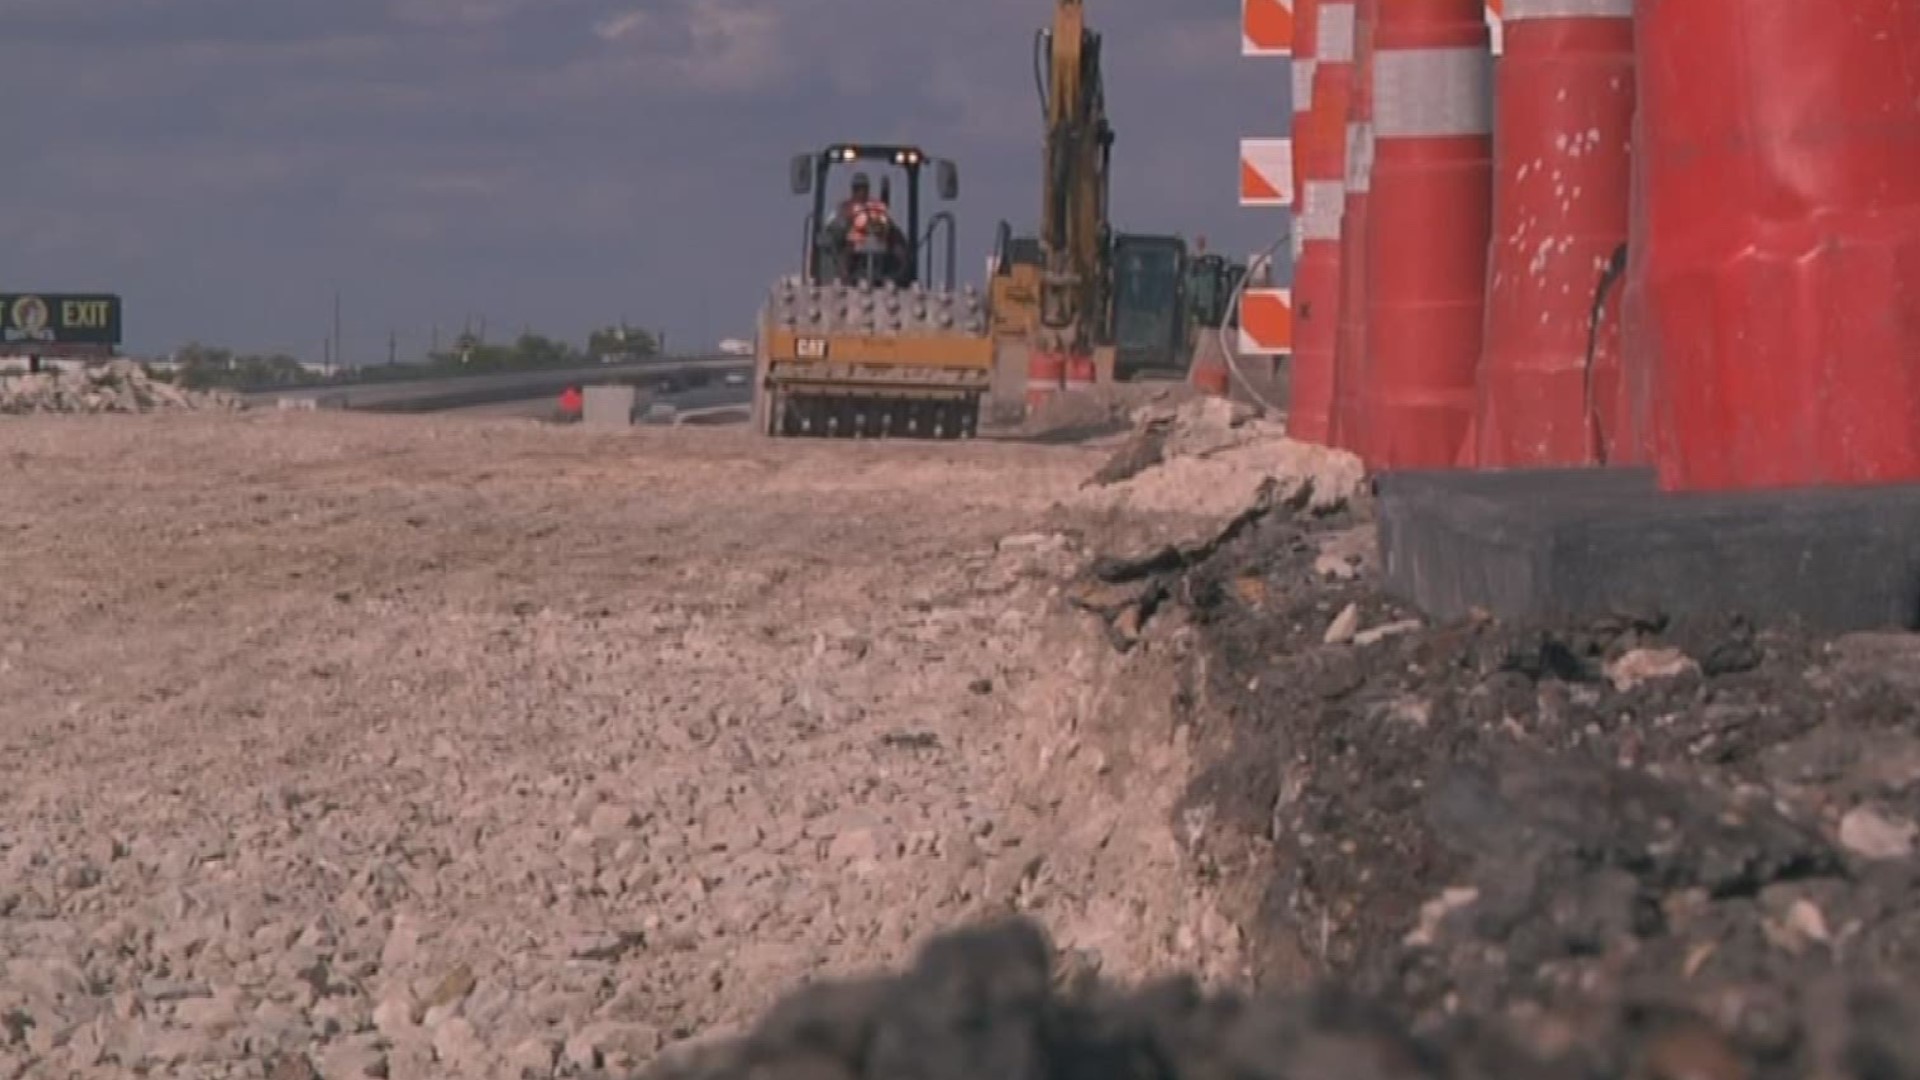 More construction set for I-35 in Waco